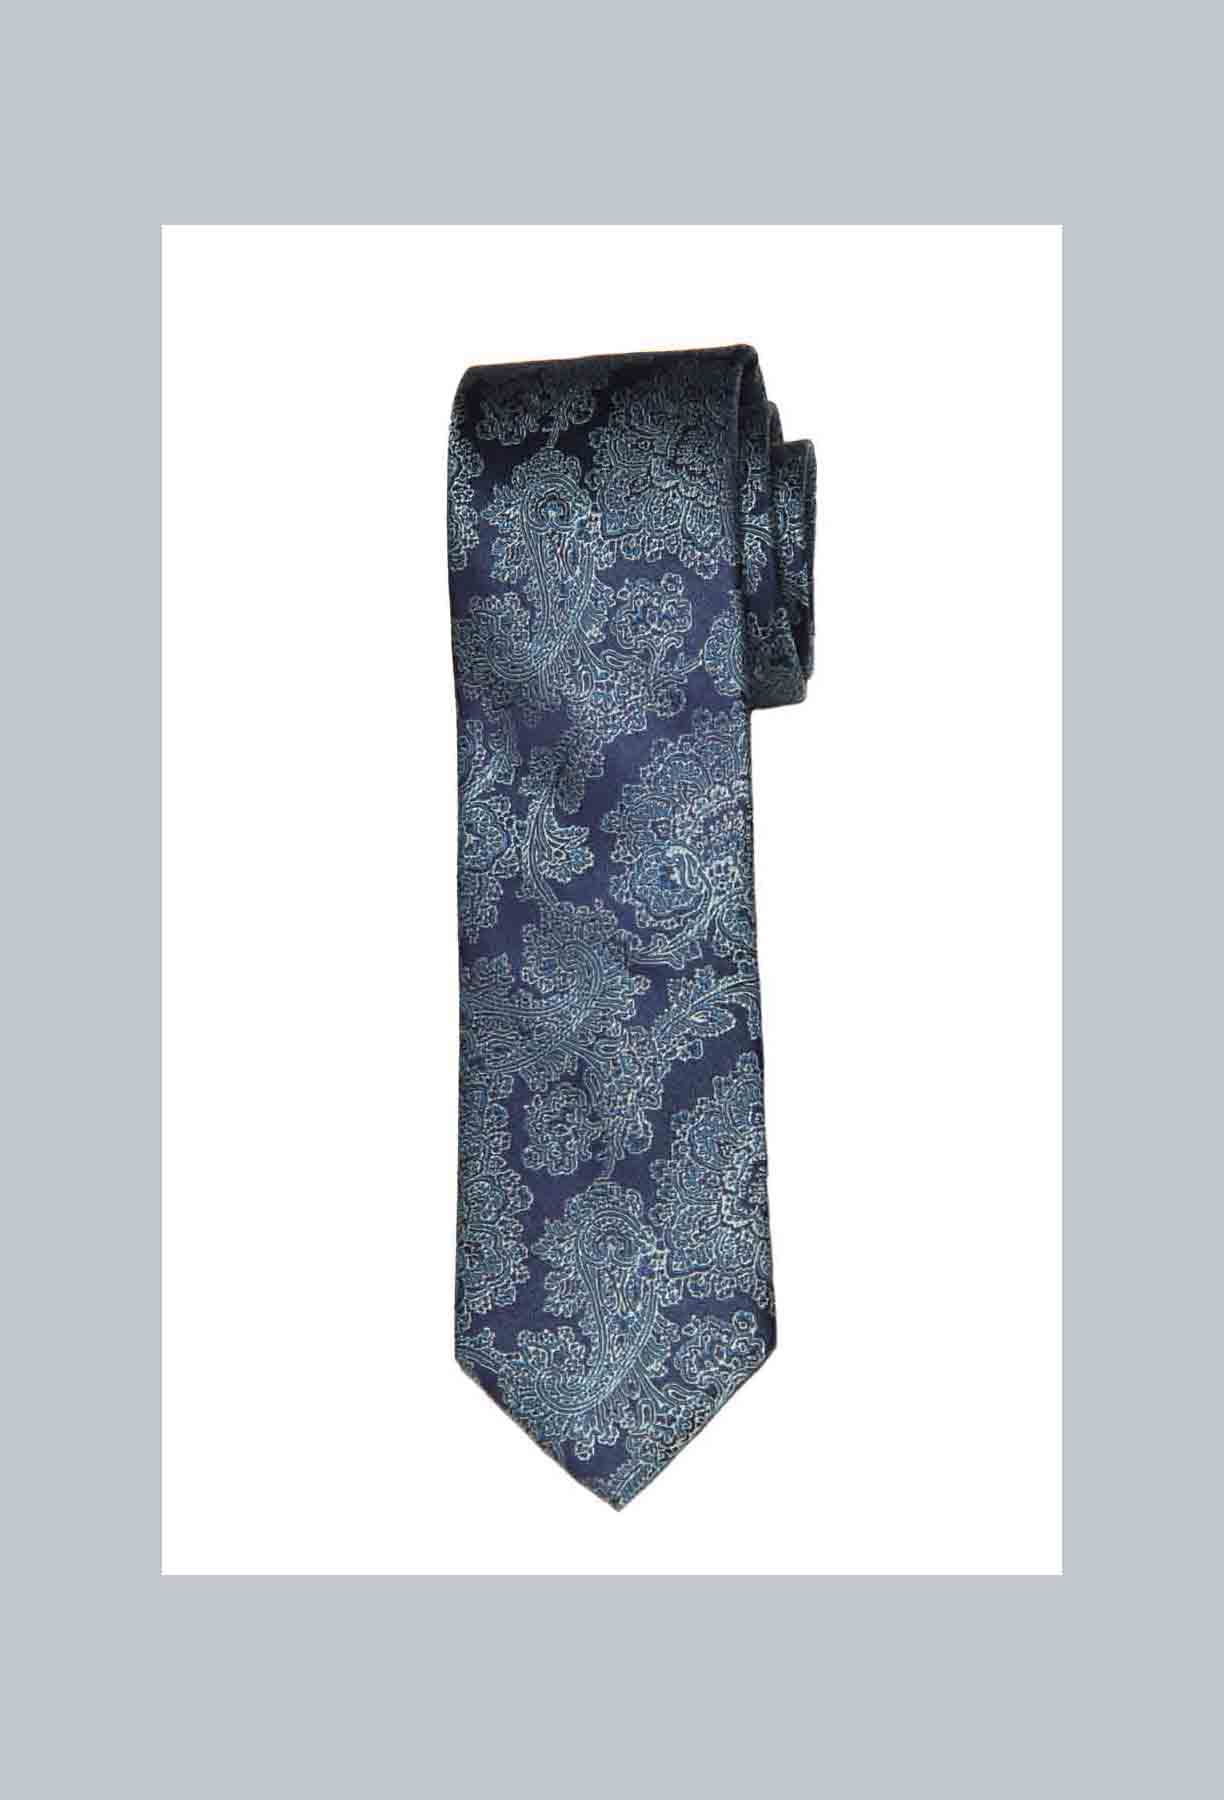 Ted Baker London Mulberry Silk Tie Navy Blue Green Paisley Floral Men's